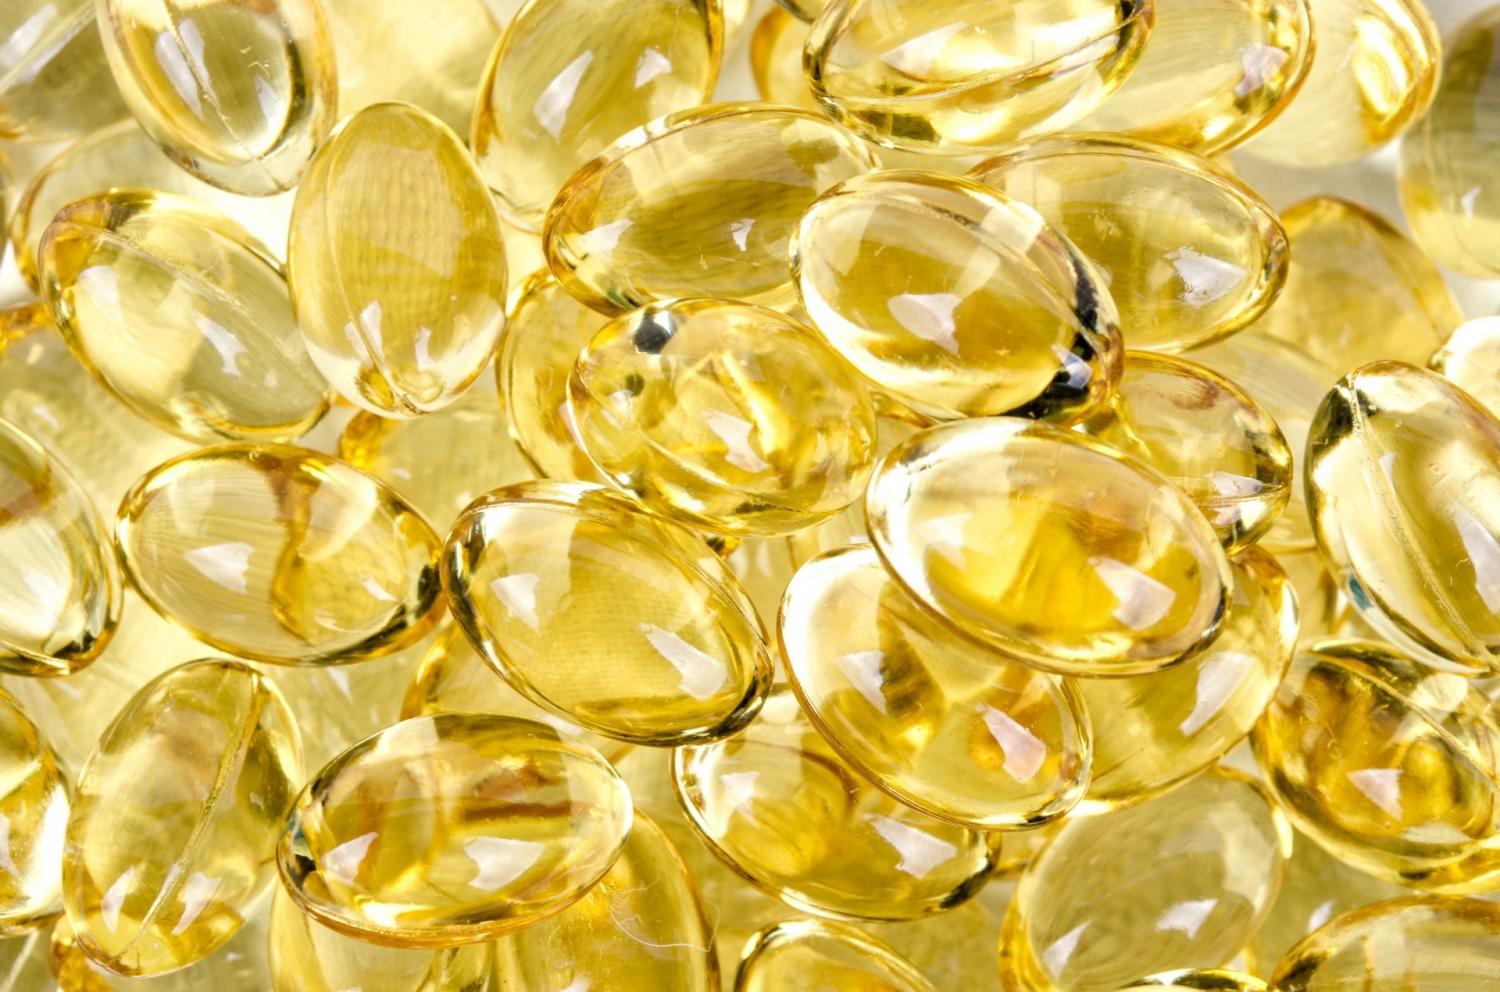 A New Look At Vitamin D Challenges The Current View Of Its